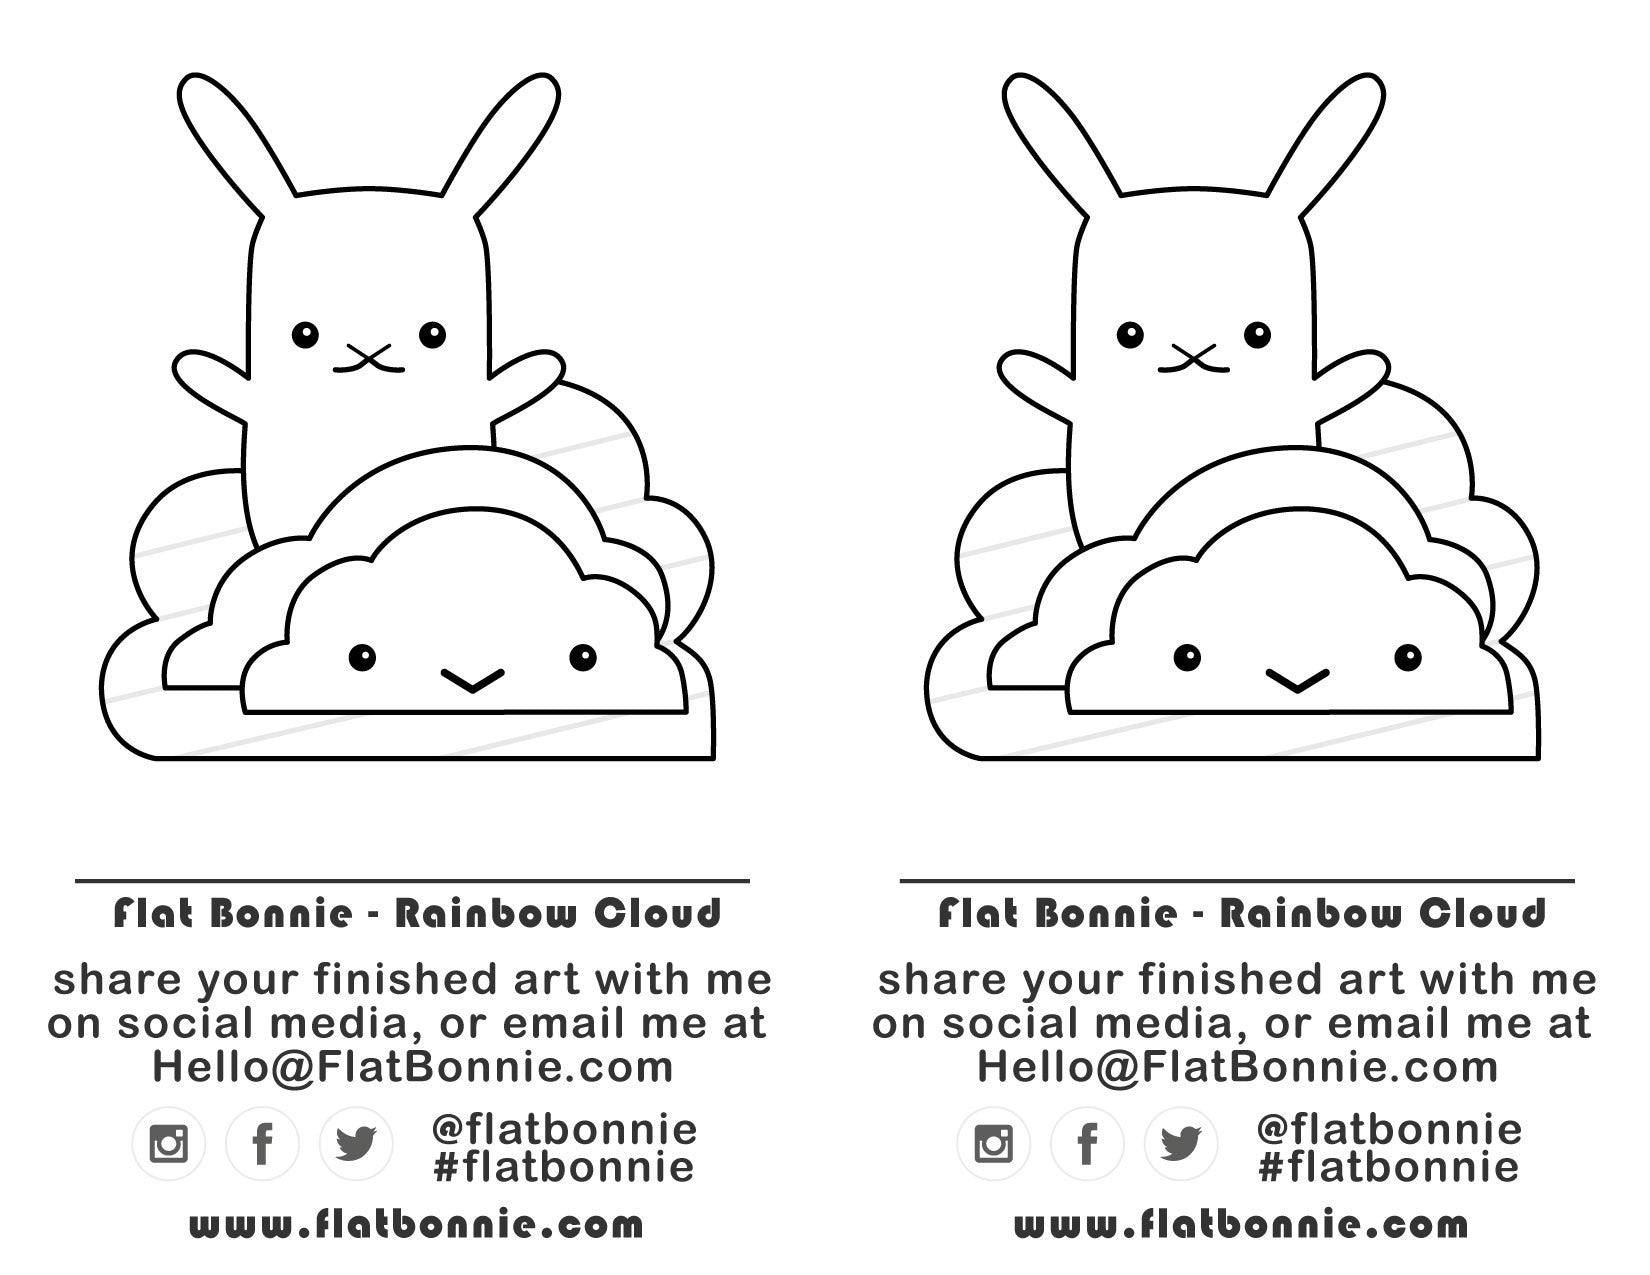 Flat-Bonnie-Free-Coloring-Page-Bunny-Rainbow-Cloud-x2